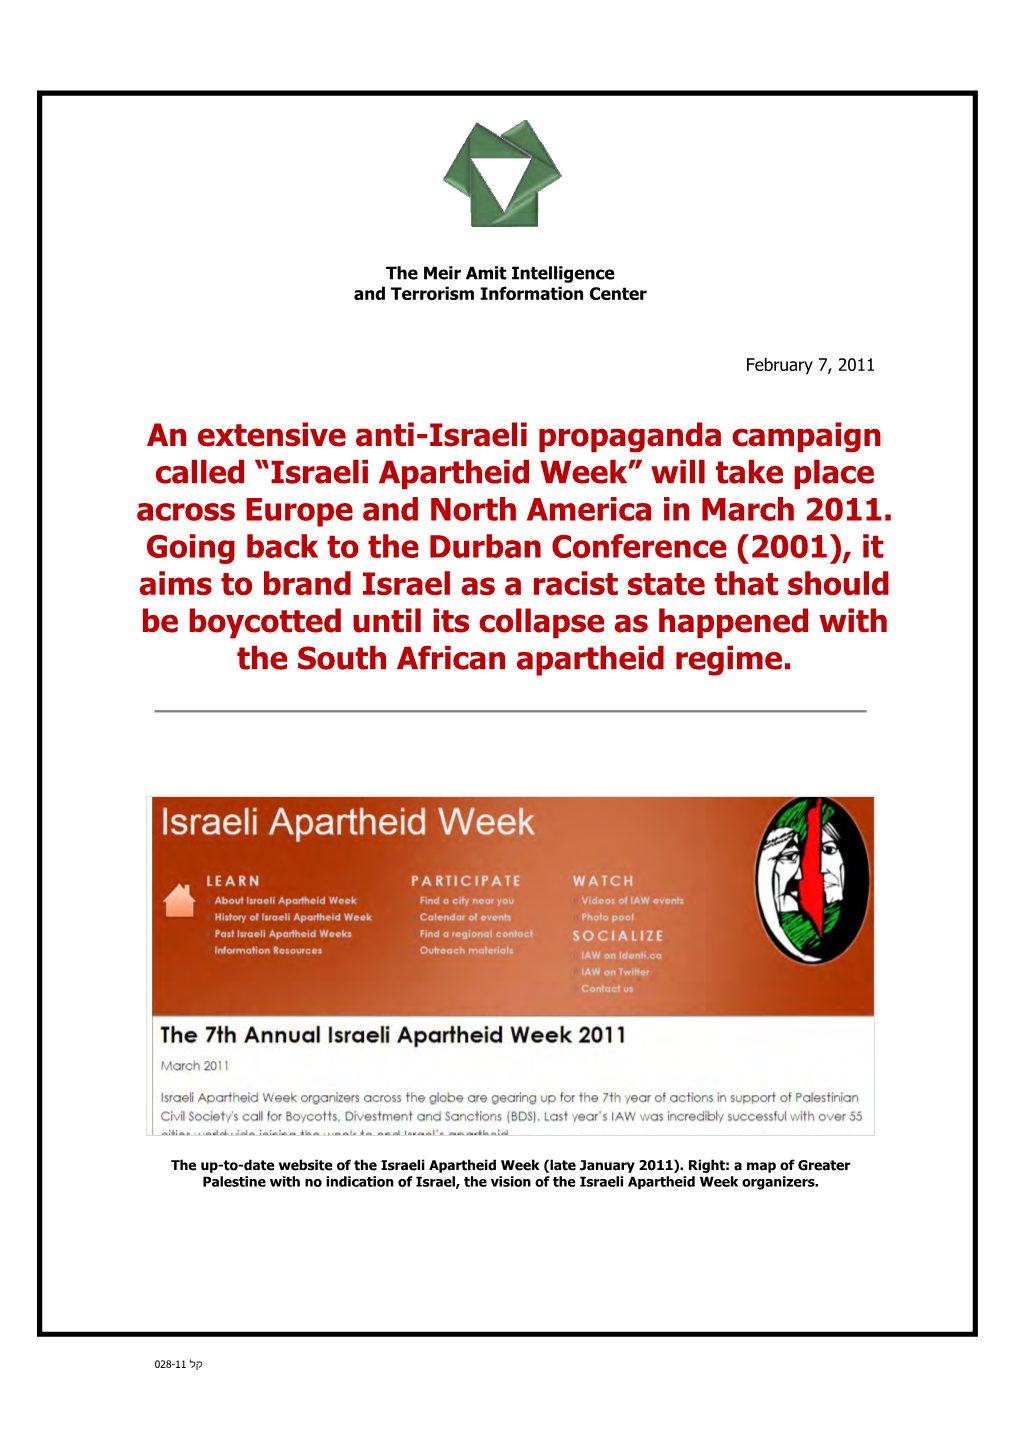 Israeli Apartheid Week” Will Take Place Across Europe and North America in March 2011